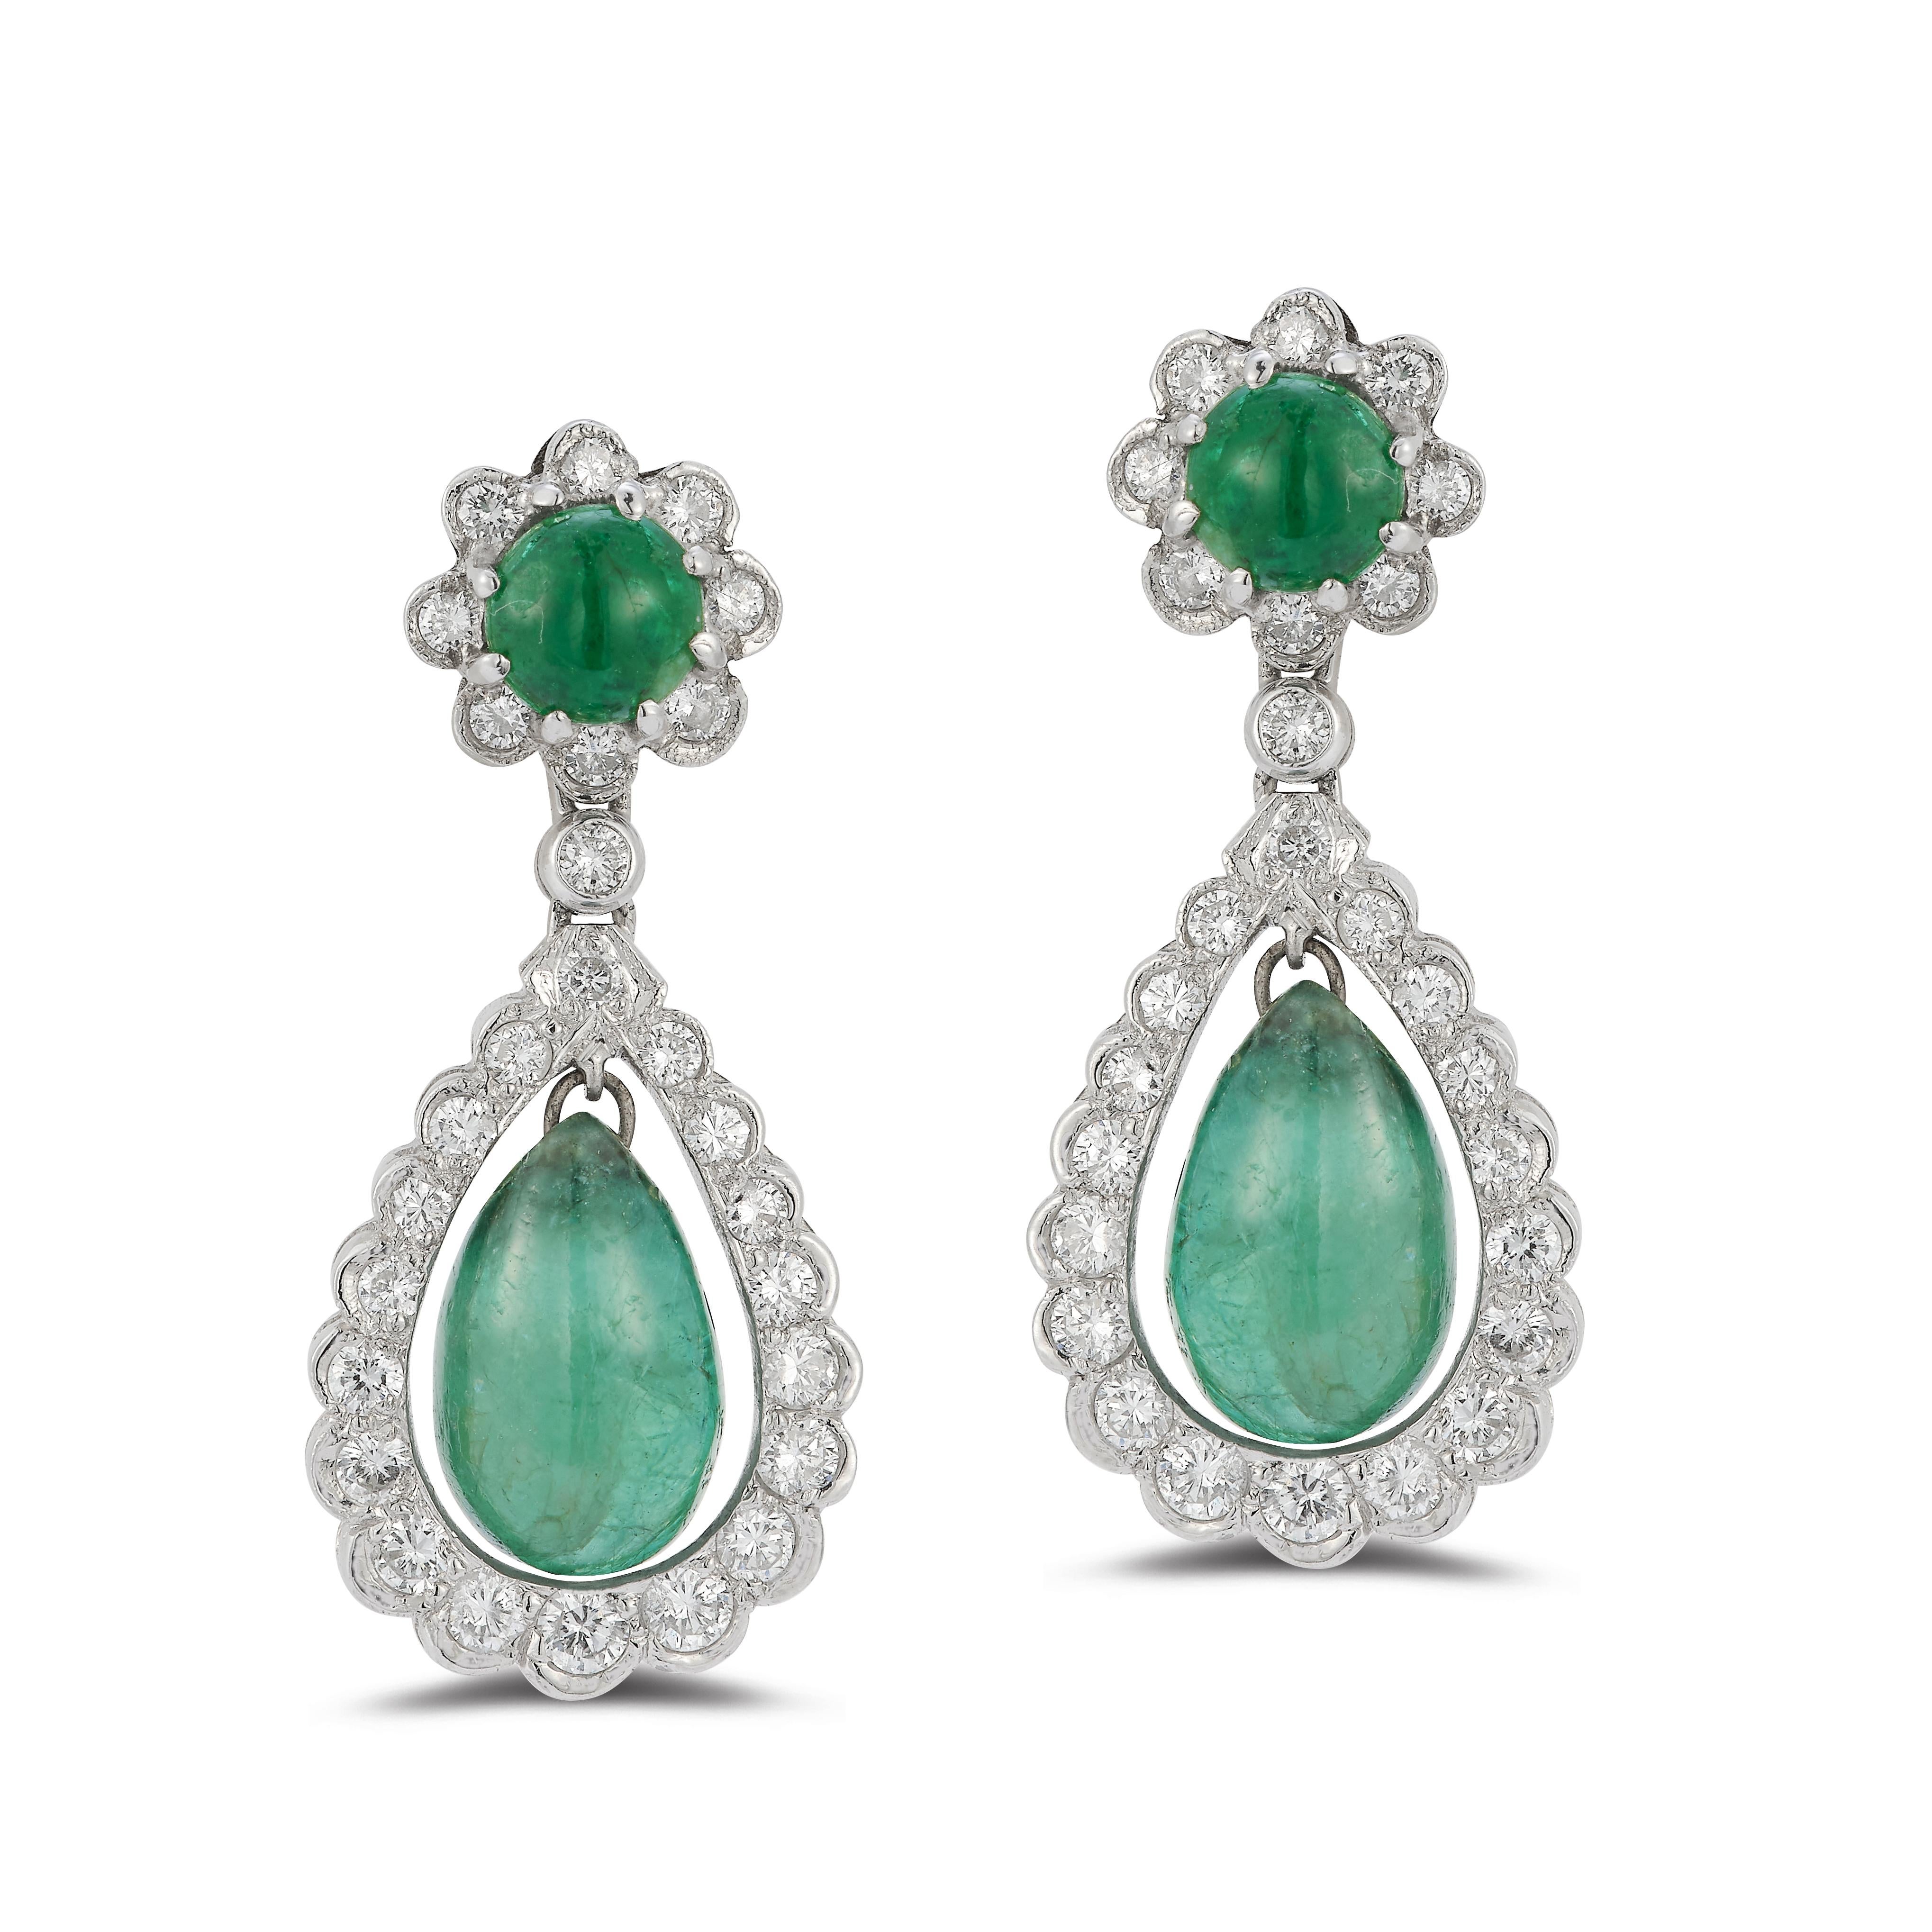 Cabochon Emerald and Diamond Earrings

14 karat white gold earrings with 2 emerald drops approximately 10 carat, 2 cabochon emeralds approximately 1.60 carat, 54 round diamonds approximately 1.74 carat 

Length:  1.25